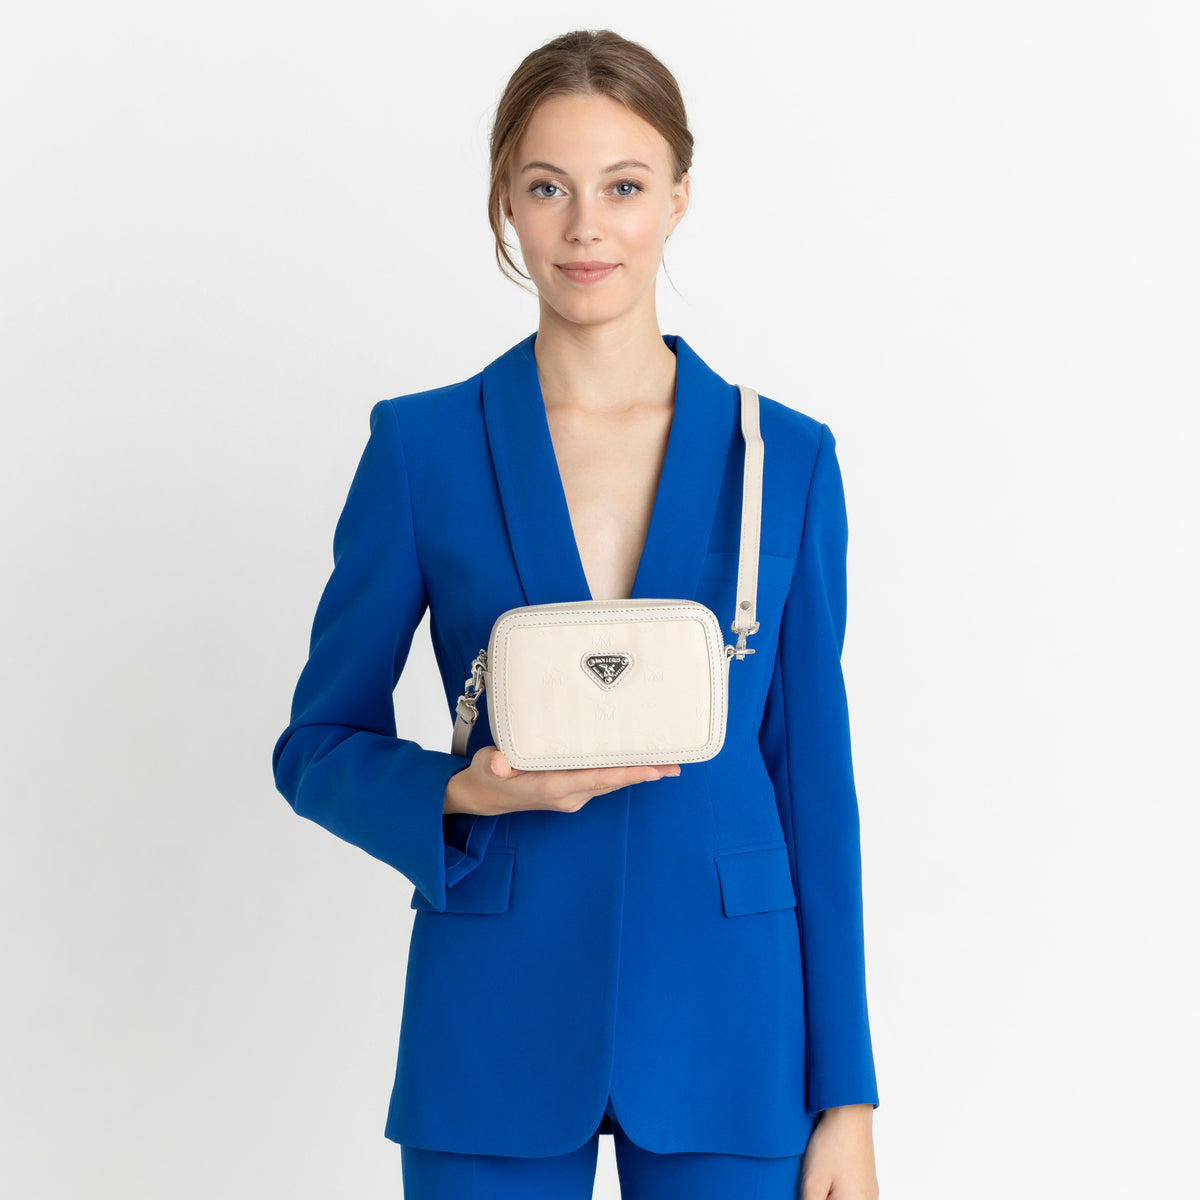 INWIL | Schultertasche pearl weiss/silber - ON BODY